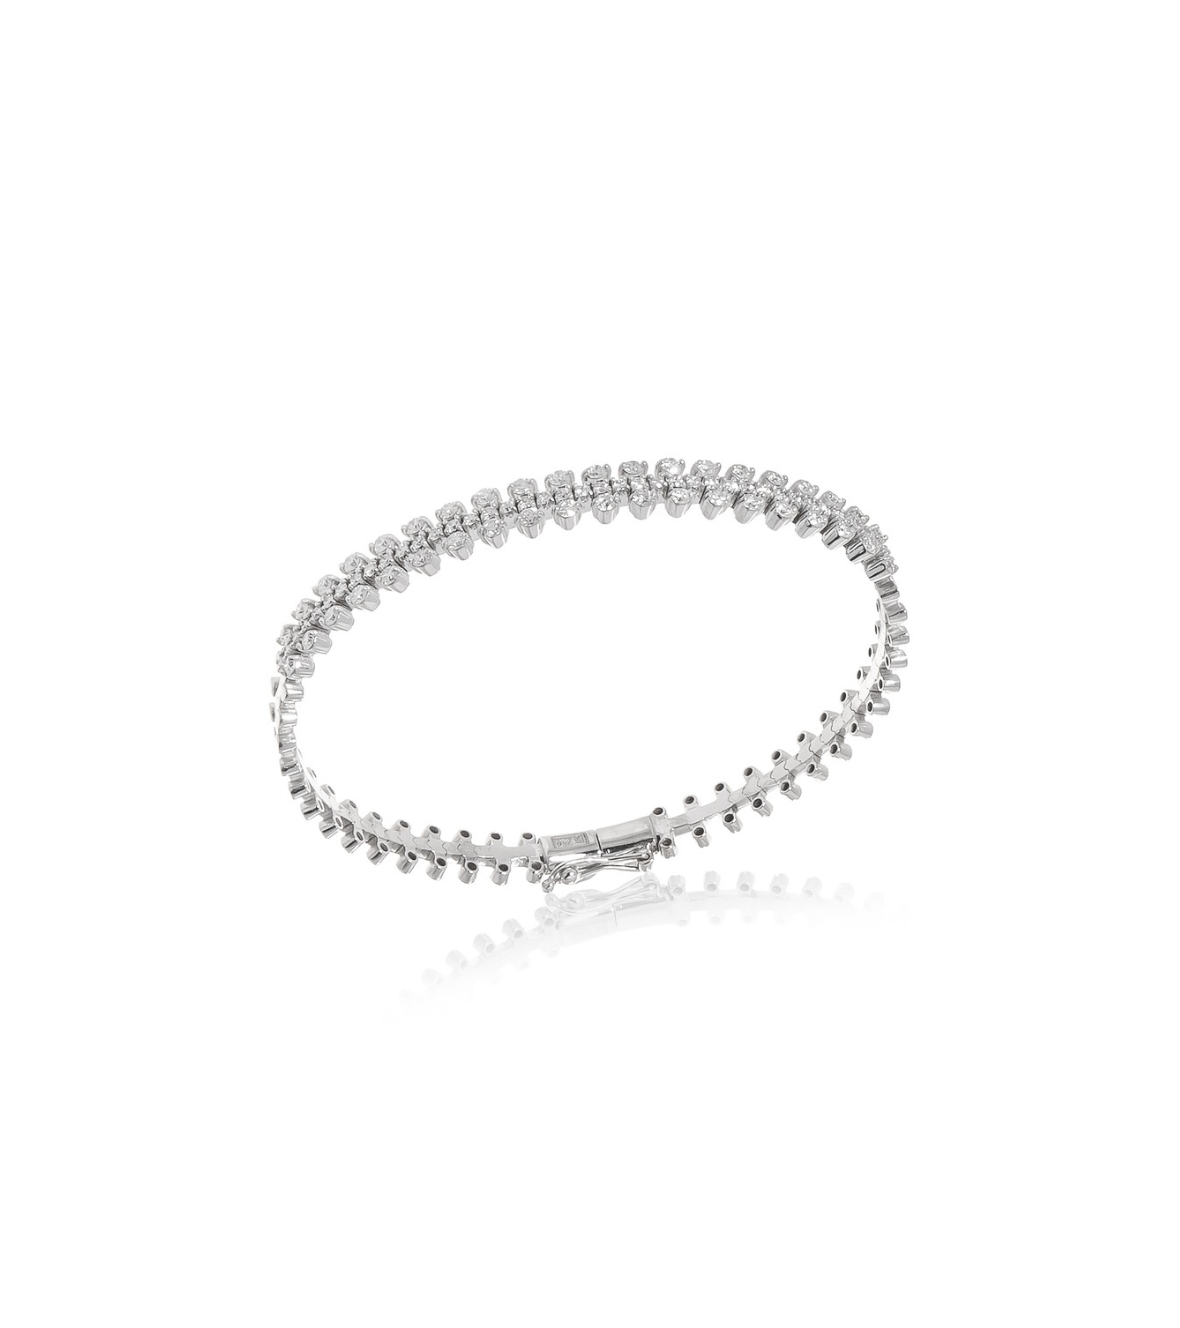 White Gold Bracelet with Diamonds 01898 Mentis Collection